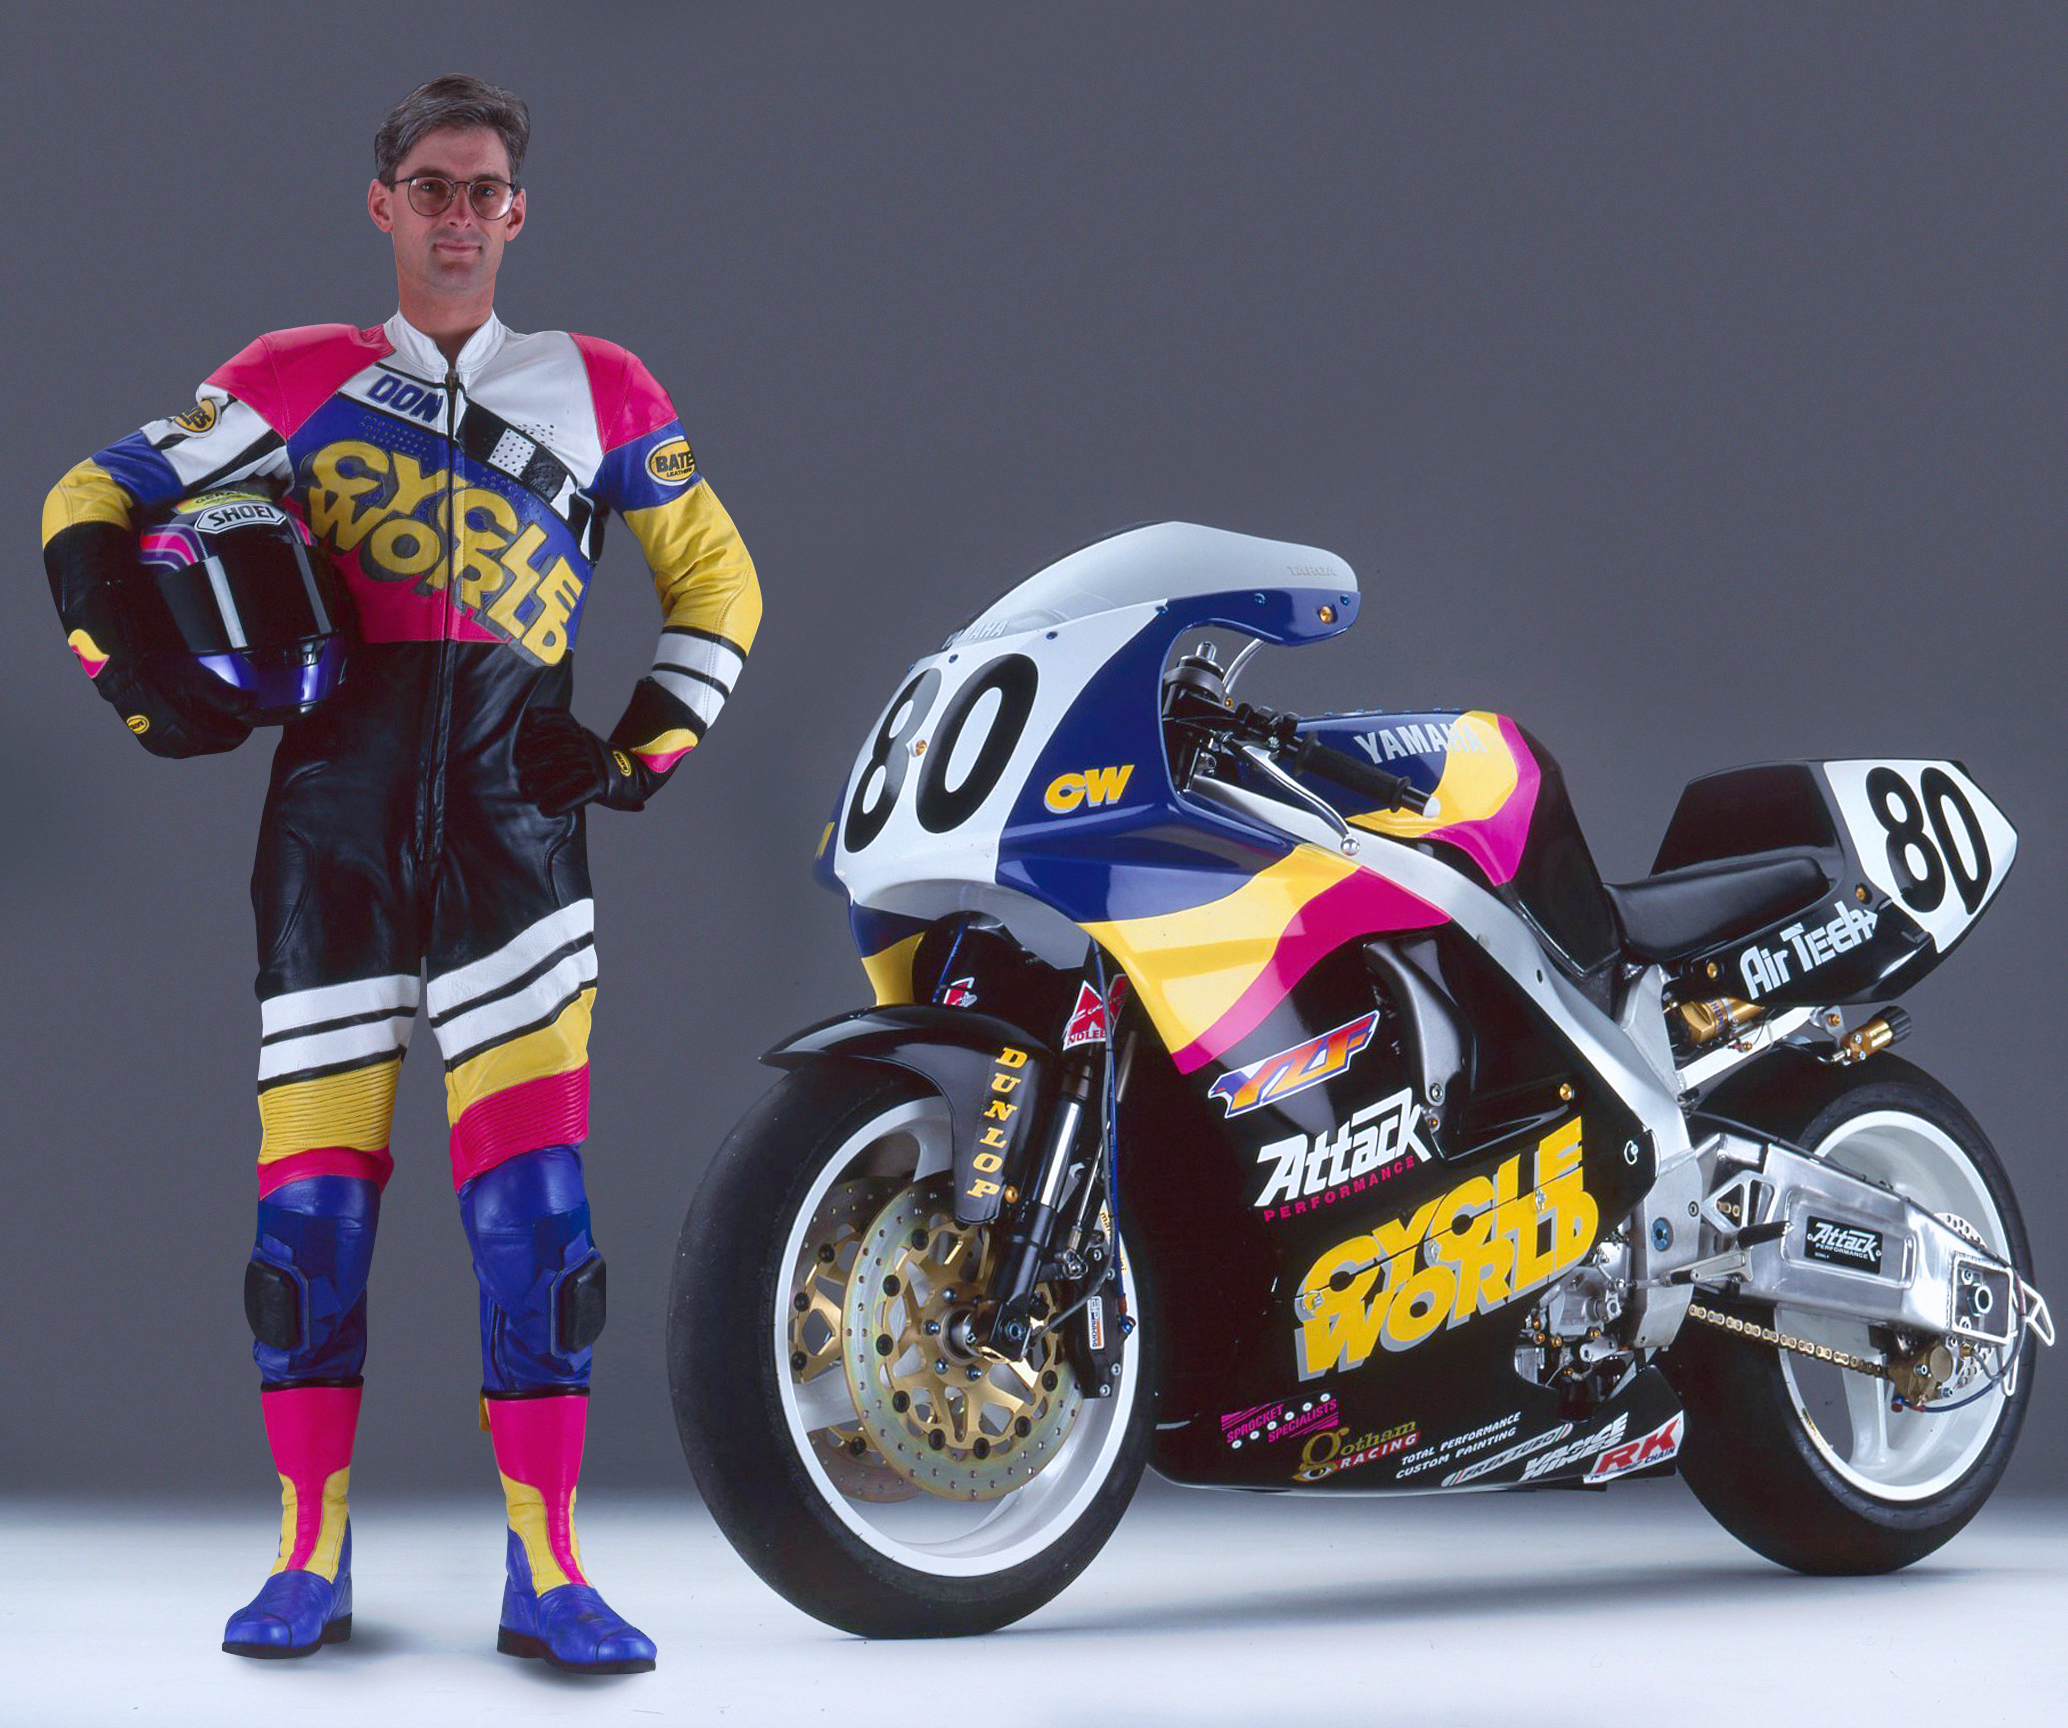 Cycle World’s road test editor Don Canet had sick custom leathers to match his YZF750 racebike.